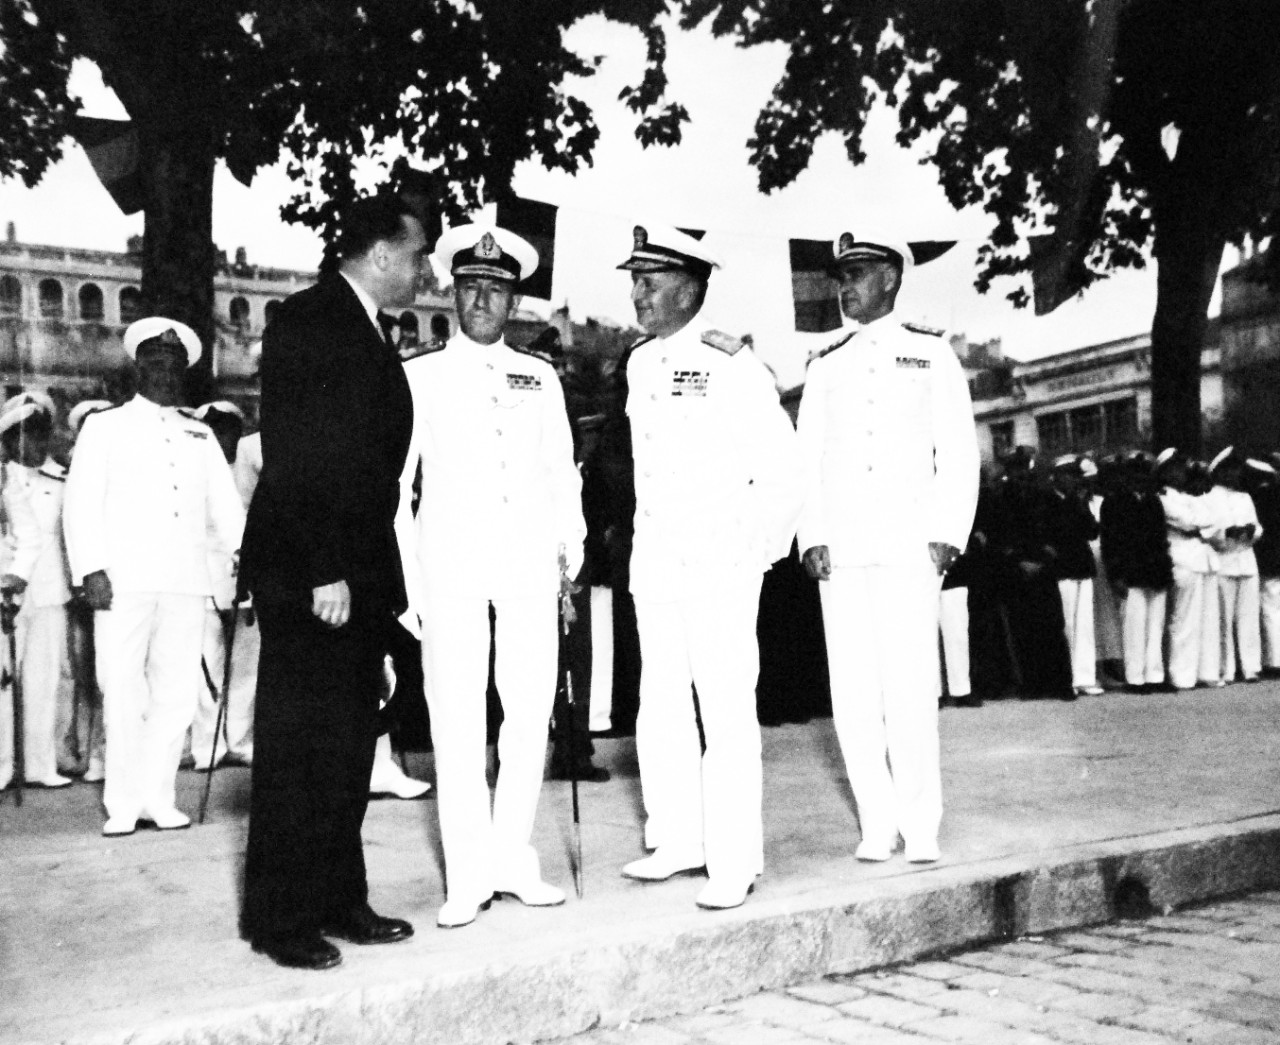 80-G-364101:  Invasion of Southern France, Toulon, August-September 1944.   Allied Naval Commanders of the Mediterranean join in victory celebration at Toulon, France, 14 September 1944.  Shown:  M. Jacquoint, Secretary of French Navy chats with Admiral Sir John H. B. Cunningham, RN, Vice Admiral H. Kent Hewitt, USN, and Rear Admiral Lyal A. Davidson, USN.    Taken by crew of USS Catoctin (AGC-5).    Official U.S. Navy Photograph, now in the collections of the National Arcchives.    Official U.S. Navy Photograph, now in the collections of the National Arcchives.    (2014/7/10).